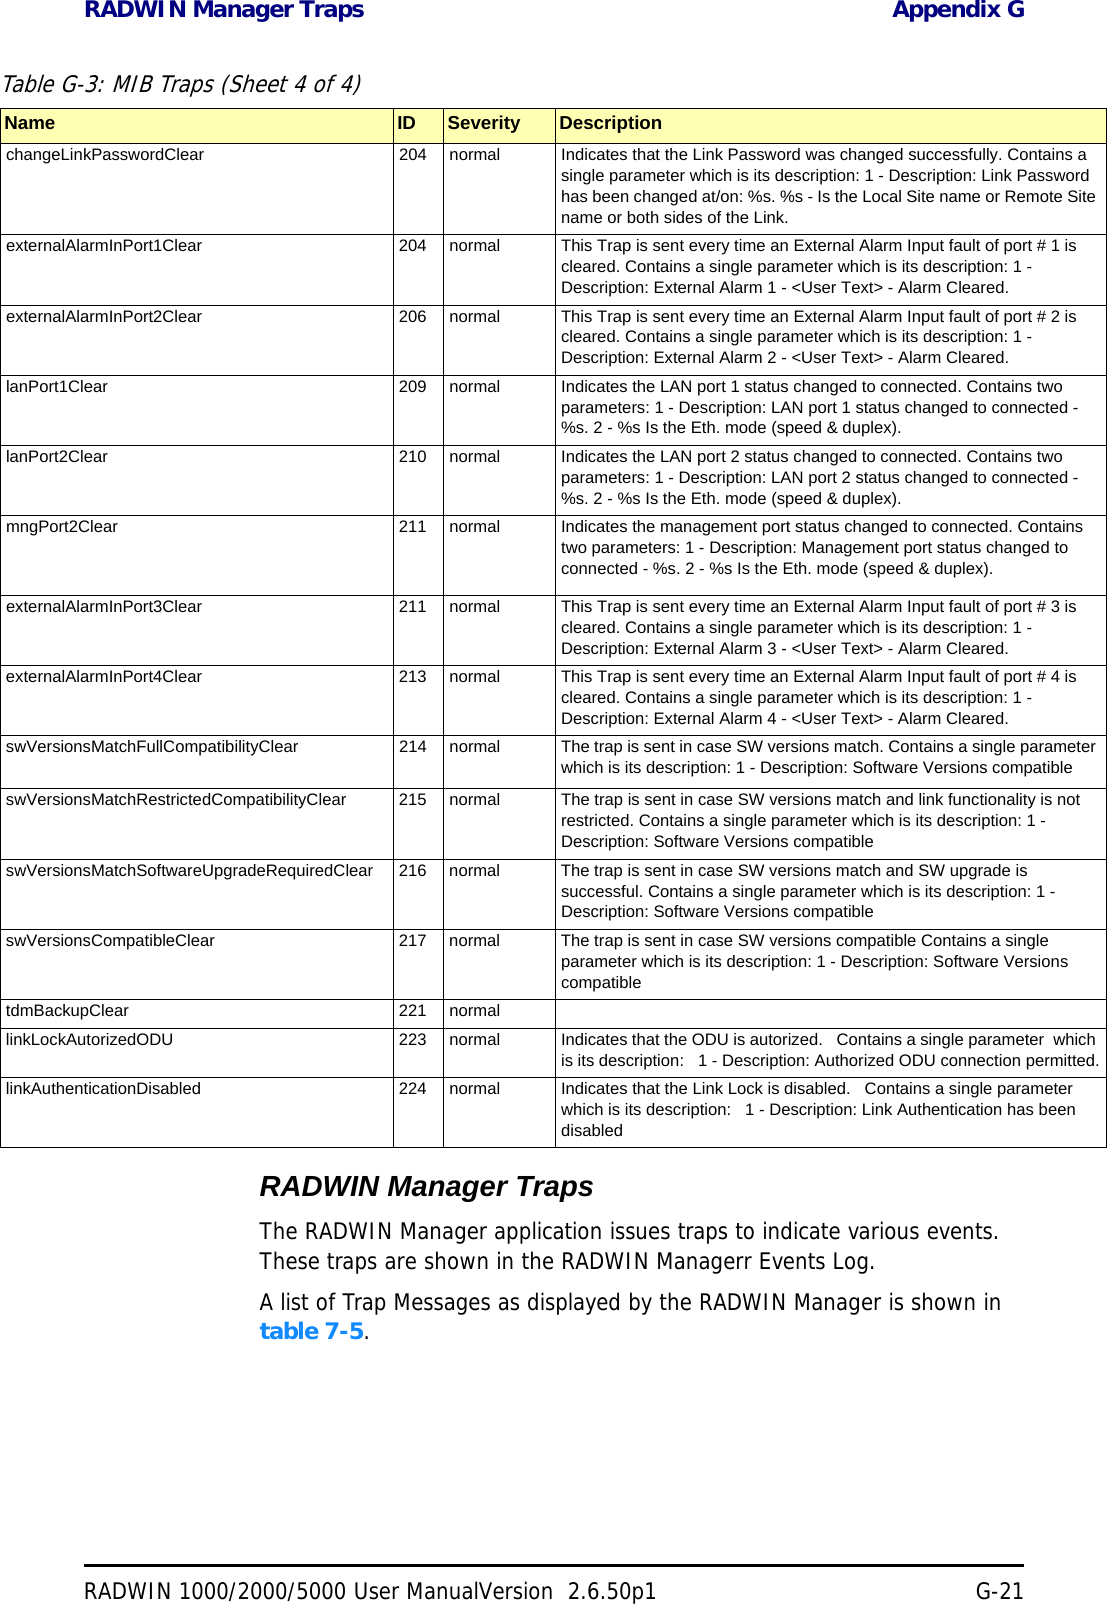 RADWIN Manager Traps Appendix GRADWIN 1000/2000/5000 User ManualVersion  2.6.50p1 G-21RADWIN Manager TrapsThe RADWIN Manager application issues traps to indicate various events. These traps are shown in the RADWIN Managerr Events Log.A list of Trap Messages as displayed by the RADWIN Manager is shown in table 7-5.changeLinkPasswordClear 204 normal Indicates that the Link Password was changed successfully. Contains a single parameter which is its description: 1 - Description: Link Password has been changed at/on: %s. %s - Is the Local Site name or Remote Site name or both sides of the Link. externalAlarmInPort1Clear 204 normal This Trap is sent every time an External Alarm Input fault of port # 1 is cleared. Contains a single parameter which is its description: 1 - Description: External Alarm 1 - &lt;User Text&gt; - Alarm Cleared. externalAlarmInPort2Clear 206 normal This Trap is sent every time an External Alarm Input fault of port # 2 is cleared. Contains a single parameter which is its description: 1 - Description: External Alarm 2 - &lt;User Text&gt; - Alarm Cleared. lanPort1Clear 209 normal Indicates the LAN port 1 status changed to connected. Contains two parameters: 1 - Description: LAN port 1 status changed to connected - %s. 2 - %s Is the Eth. mode (speed &amp; duplex). lanPort2Clear 210 normal Indicates the LAN port 2 status changed to connected. Contains two parameters: 1 - Description: LAN port 2 status changed to connected - %s. 2 - %s Is the Eth. mode (speed &amp; duplex). mngPort2Clear 211 normal Indicates the management port status changed to connected. Contains two parameters: 1 - Description: Management port status changed to connected - %s. 2 - %s Is the Eth. mode (speed &amp; duplex). externalAlarmInPort3Clear 211 normal This Trap is sent every time an External Alarm Input fault of port # 3 is cleared. Contains a single parameter which is its description: 1 - Description: External Alarm 3 - &lt;User Text&gt; - Alarm Cleared. externalAlarmInPort4Clear 213 normal This Trap is sent every time an External Alarm Input fault of port # 4 is cleared. Contains a single parameter which is its description: 1 - Description: External Alarm 4 - &lt;User Text&gt; - Alarm Cleared. swVersionsMatchFullCompatibilityClear 214 normal The trap is sent in case SW versions match. Contains a single parameter which is its description: 1 - Description: Software Versions compatible swVersionsMatchRestrictedCompatibilityClear 215 normal The trap is sent in case SW versions match and link functionality is not restricted. Contains a single parameter which is its description: 1 - Description: Software Versions compatible swVersionsMatchSoftwareUpgradeRequiredClear 216 normal The trap is sent in case SW versions match and SW upgrade is successful. Contains a single parameter which is its description: 1 - Description: Software Versions compatible swVersionsCompatibleClear 217 normal The trap is sent in case SW versions compatible Contains a single parameter which is its description: 1 - Description: Software Versions compatible tdmBackupClear 221 normallinkLockAutorizedODU 223 normal Indicates that the ODU is autorized.  Contains a single parameter  which is its description:  1 - Description: Authorized ODU connection permitted.linkAuthenticationDisabled 224 normal Indicates that the Link Lock is disabled.  Contains a single parameter  which is its description:  1 - Description: Link Authentication has been disabledTable G-3: MIB Traps (Sheet 4 of 4)Name ID Severity Description